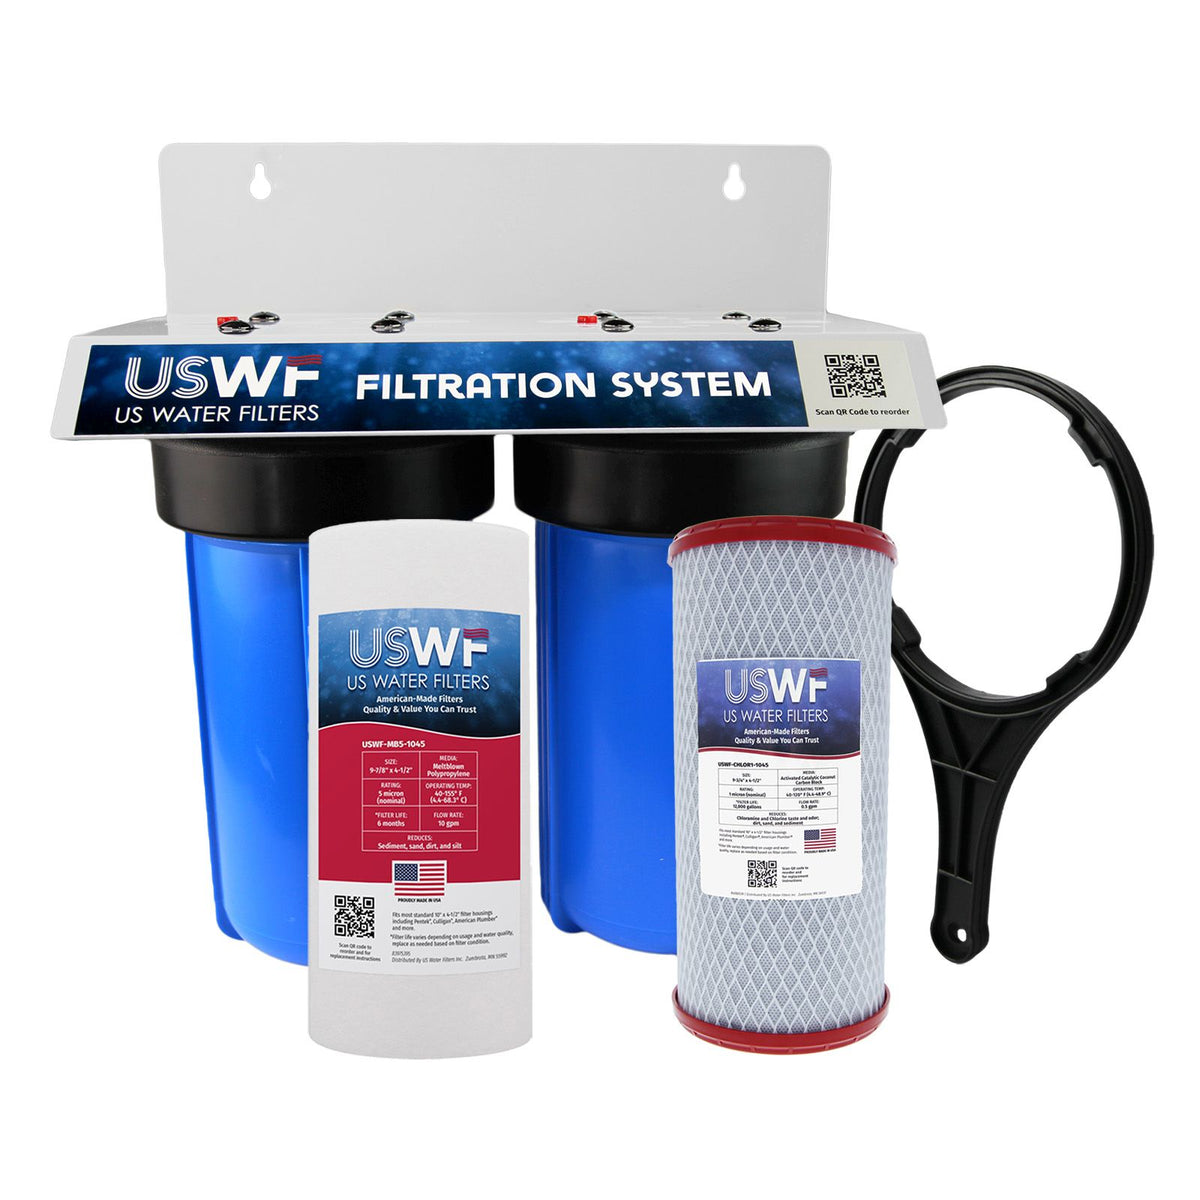 USWF Chloramine Dual 10&quot; 2-Stage Filtration System, Sediment &amp; Chloramine Carbon Block Filters, 1&quot; Inlet/Outleter 3